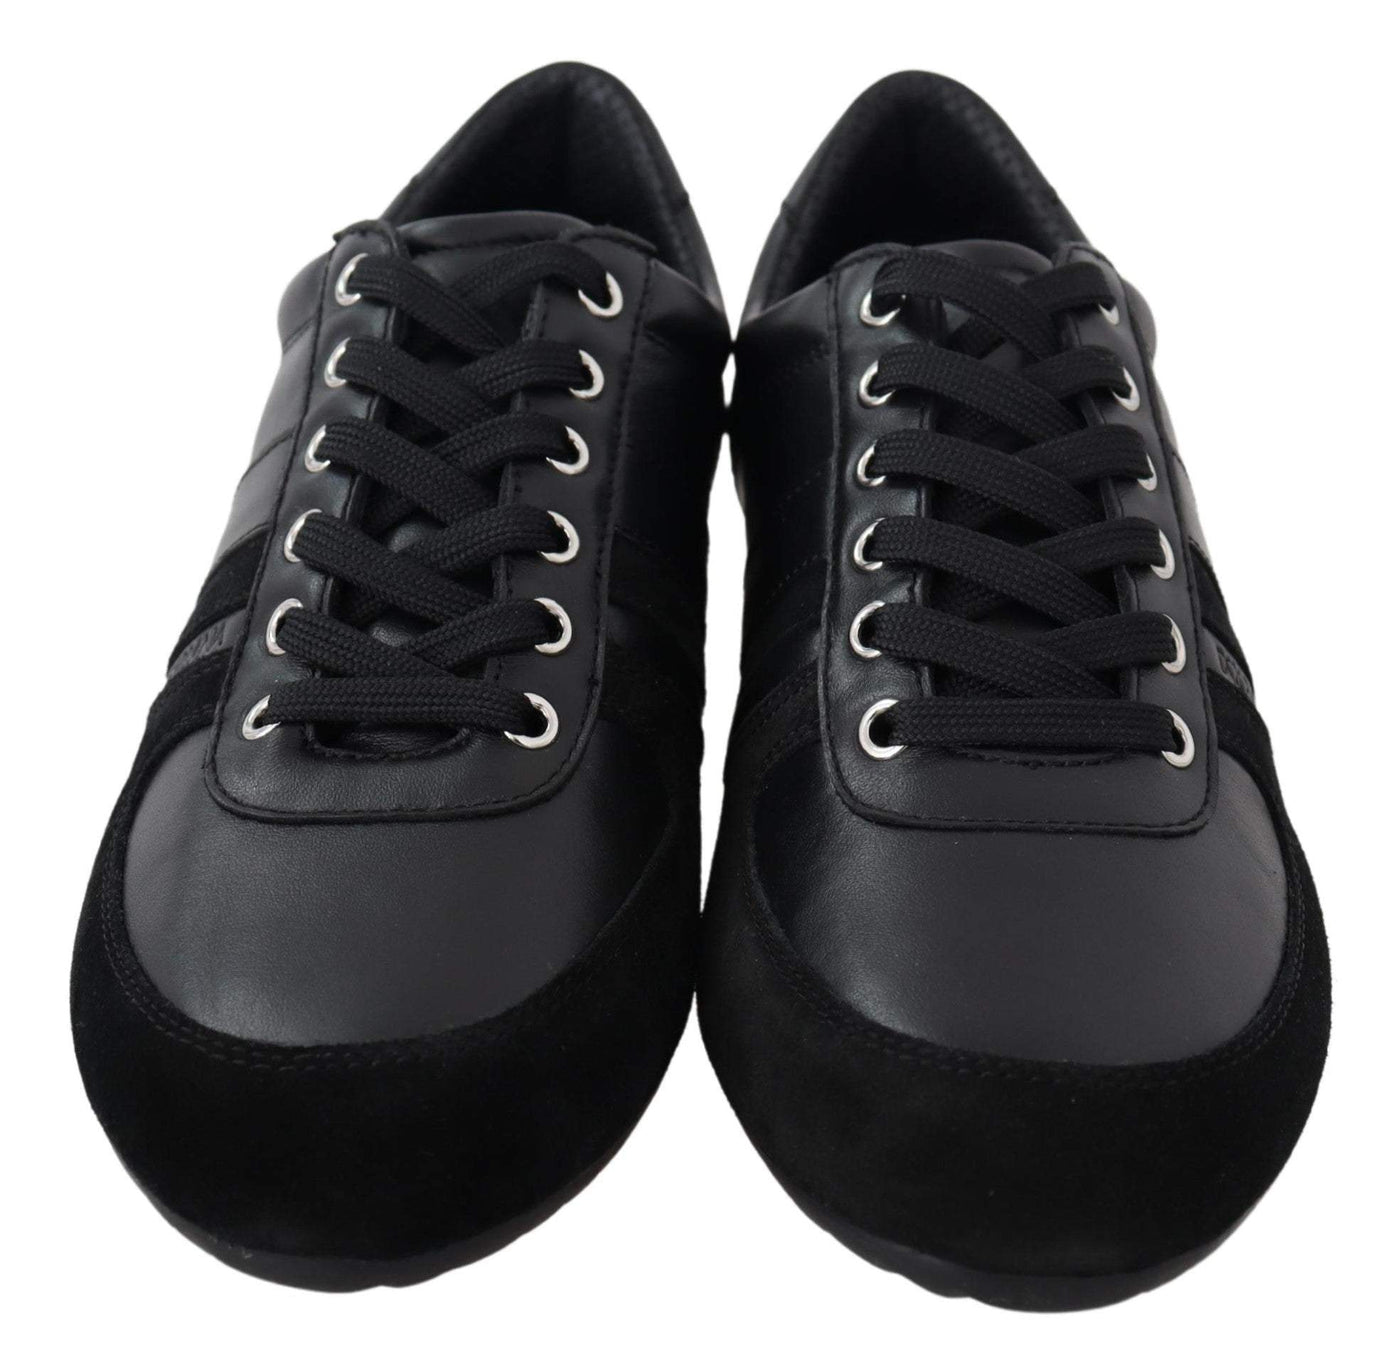 Dolce & Gabbana Black Logo Leather Casual Sneakers Shoes #men, Black, Dolce & Gabbana, EU39/US6, EU40/US7, EU43/US10, EU44.5/US11.5, EU44/US11, EU45/US12, EU46 /US13, feed-agegroup-adult, feed-color-Black, feed-gender-male, Shoes - New Arrivals, Sneakers - Men - Shoes at SEYMAYKA